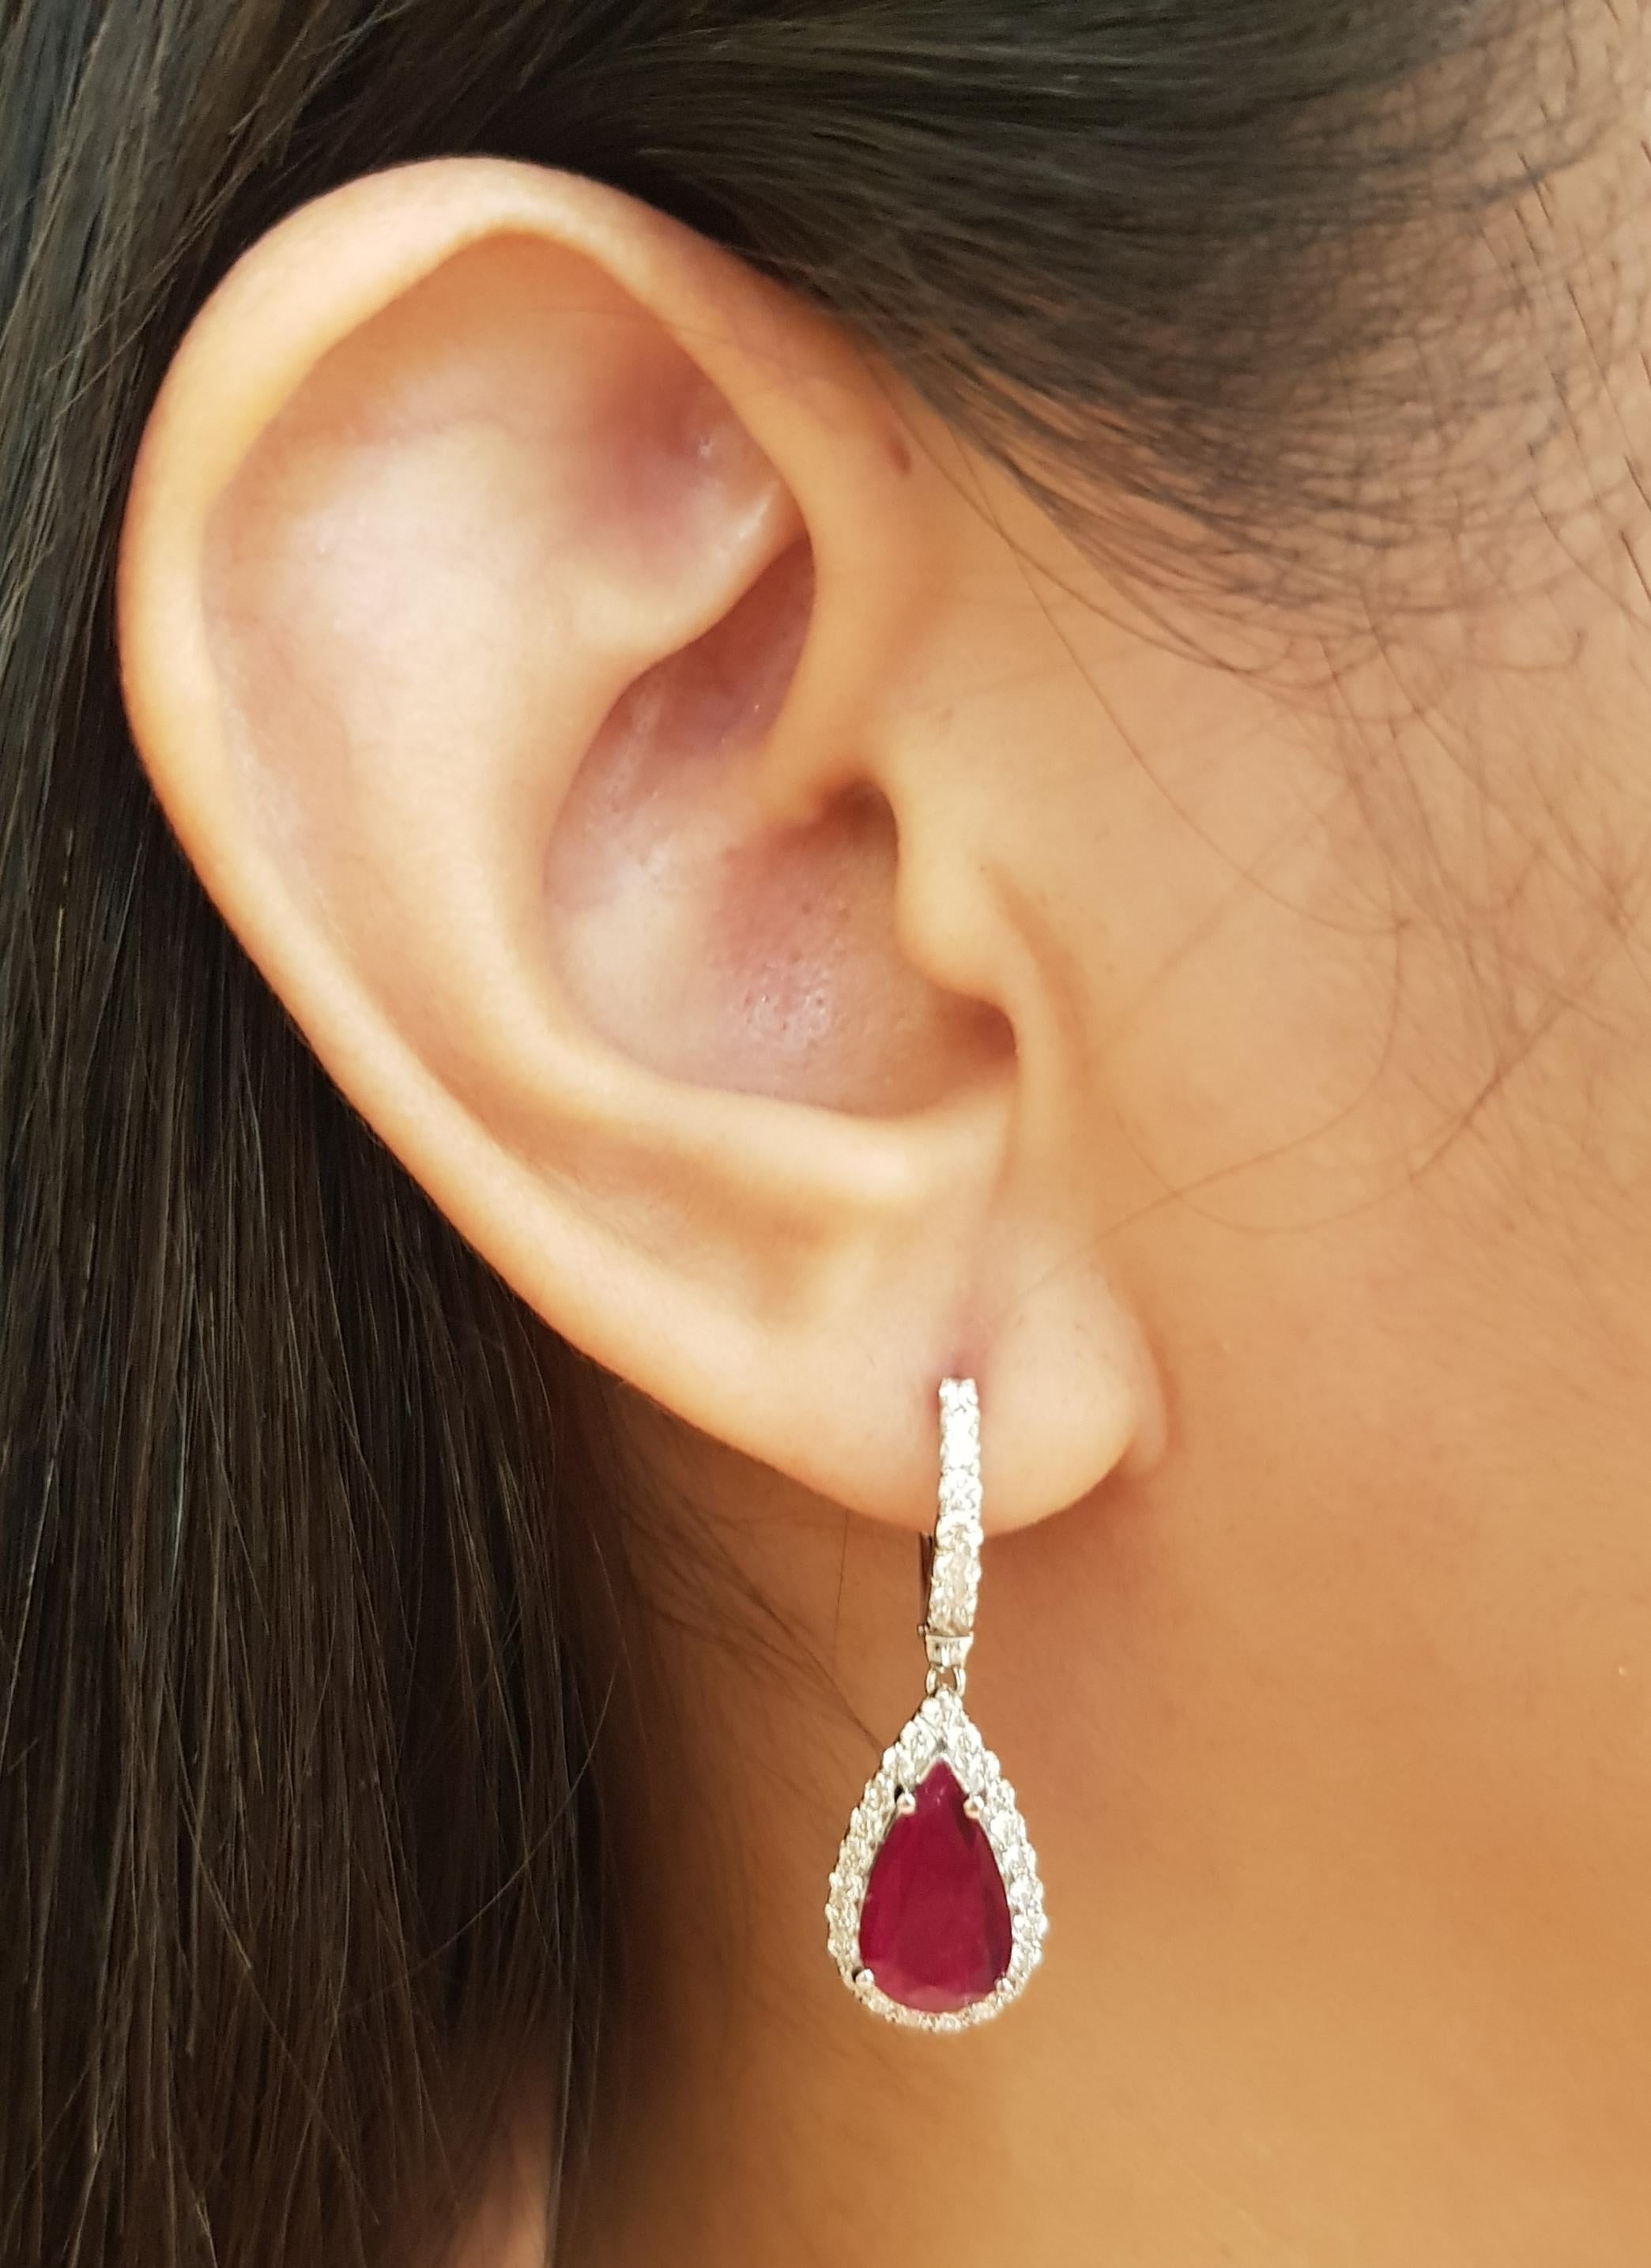 Ruby 2.35 carats with Diamond 0.82 carat Earrings set in 18K White Gold Settings

Width: 1.0 cm 
Length: 3.0 cm
Total Weight: 5.57 grams

